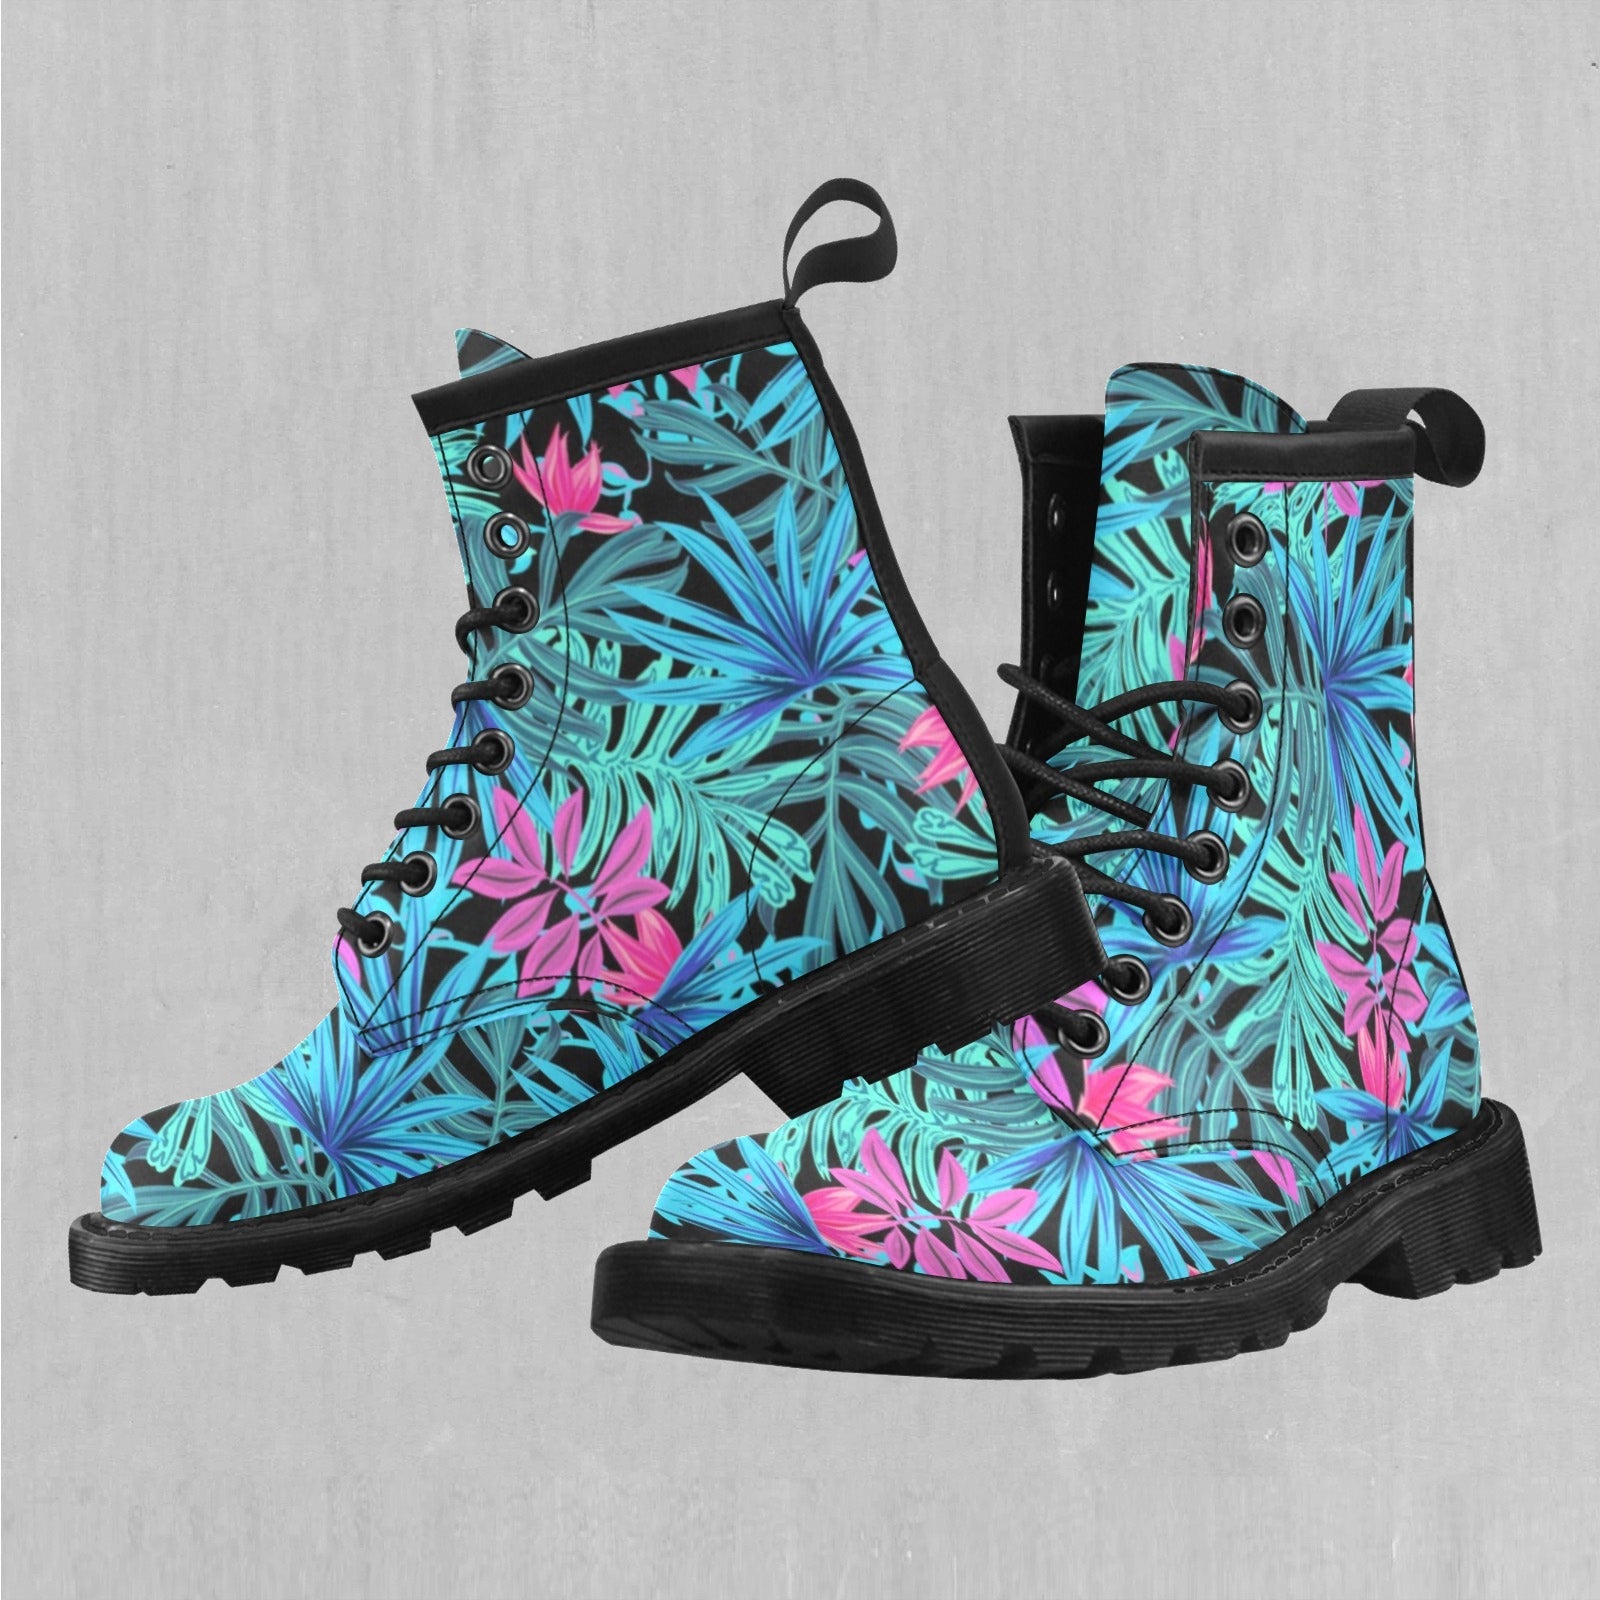 Neon Lush Women's Lace Up Boots